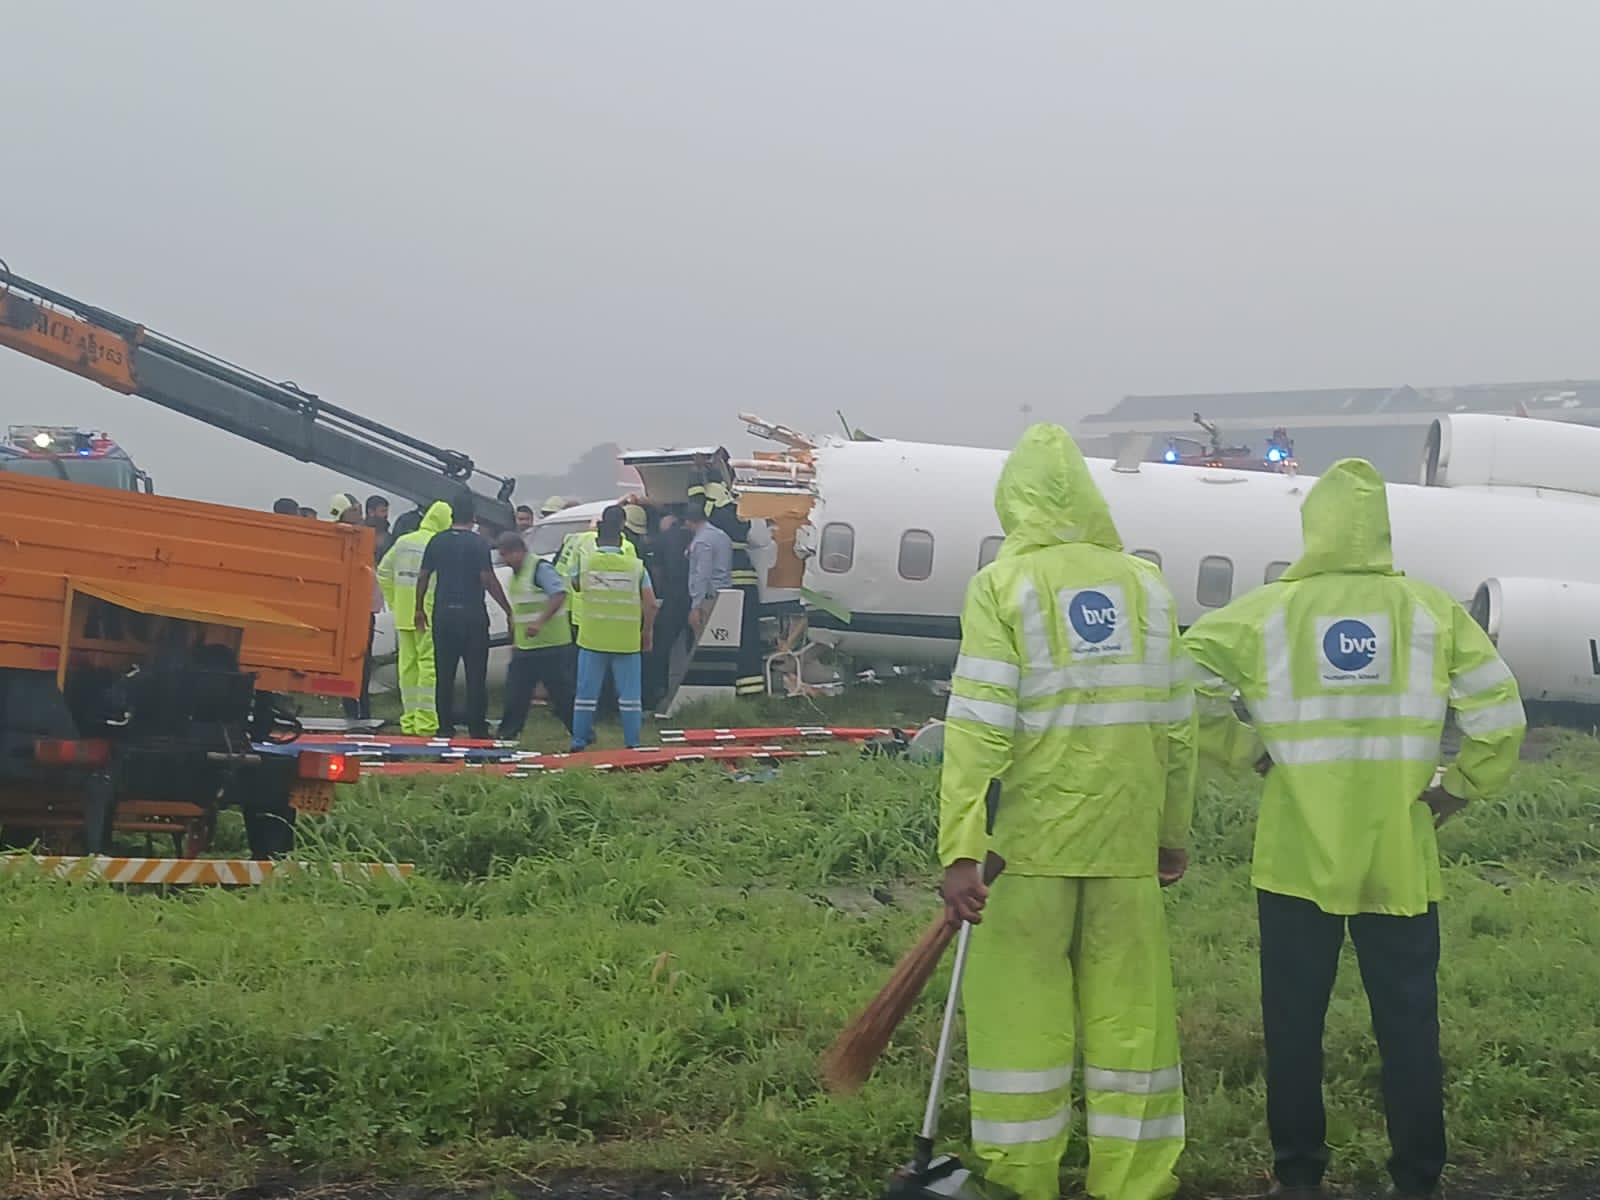 3 Injured As Private Aircraft With 8 Flyers Splits From Middle After Skidding Off Runway At Mumbai Airport